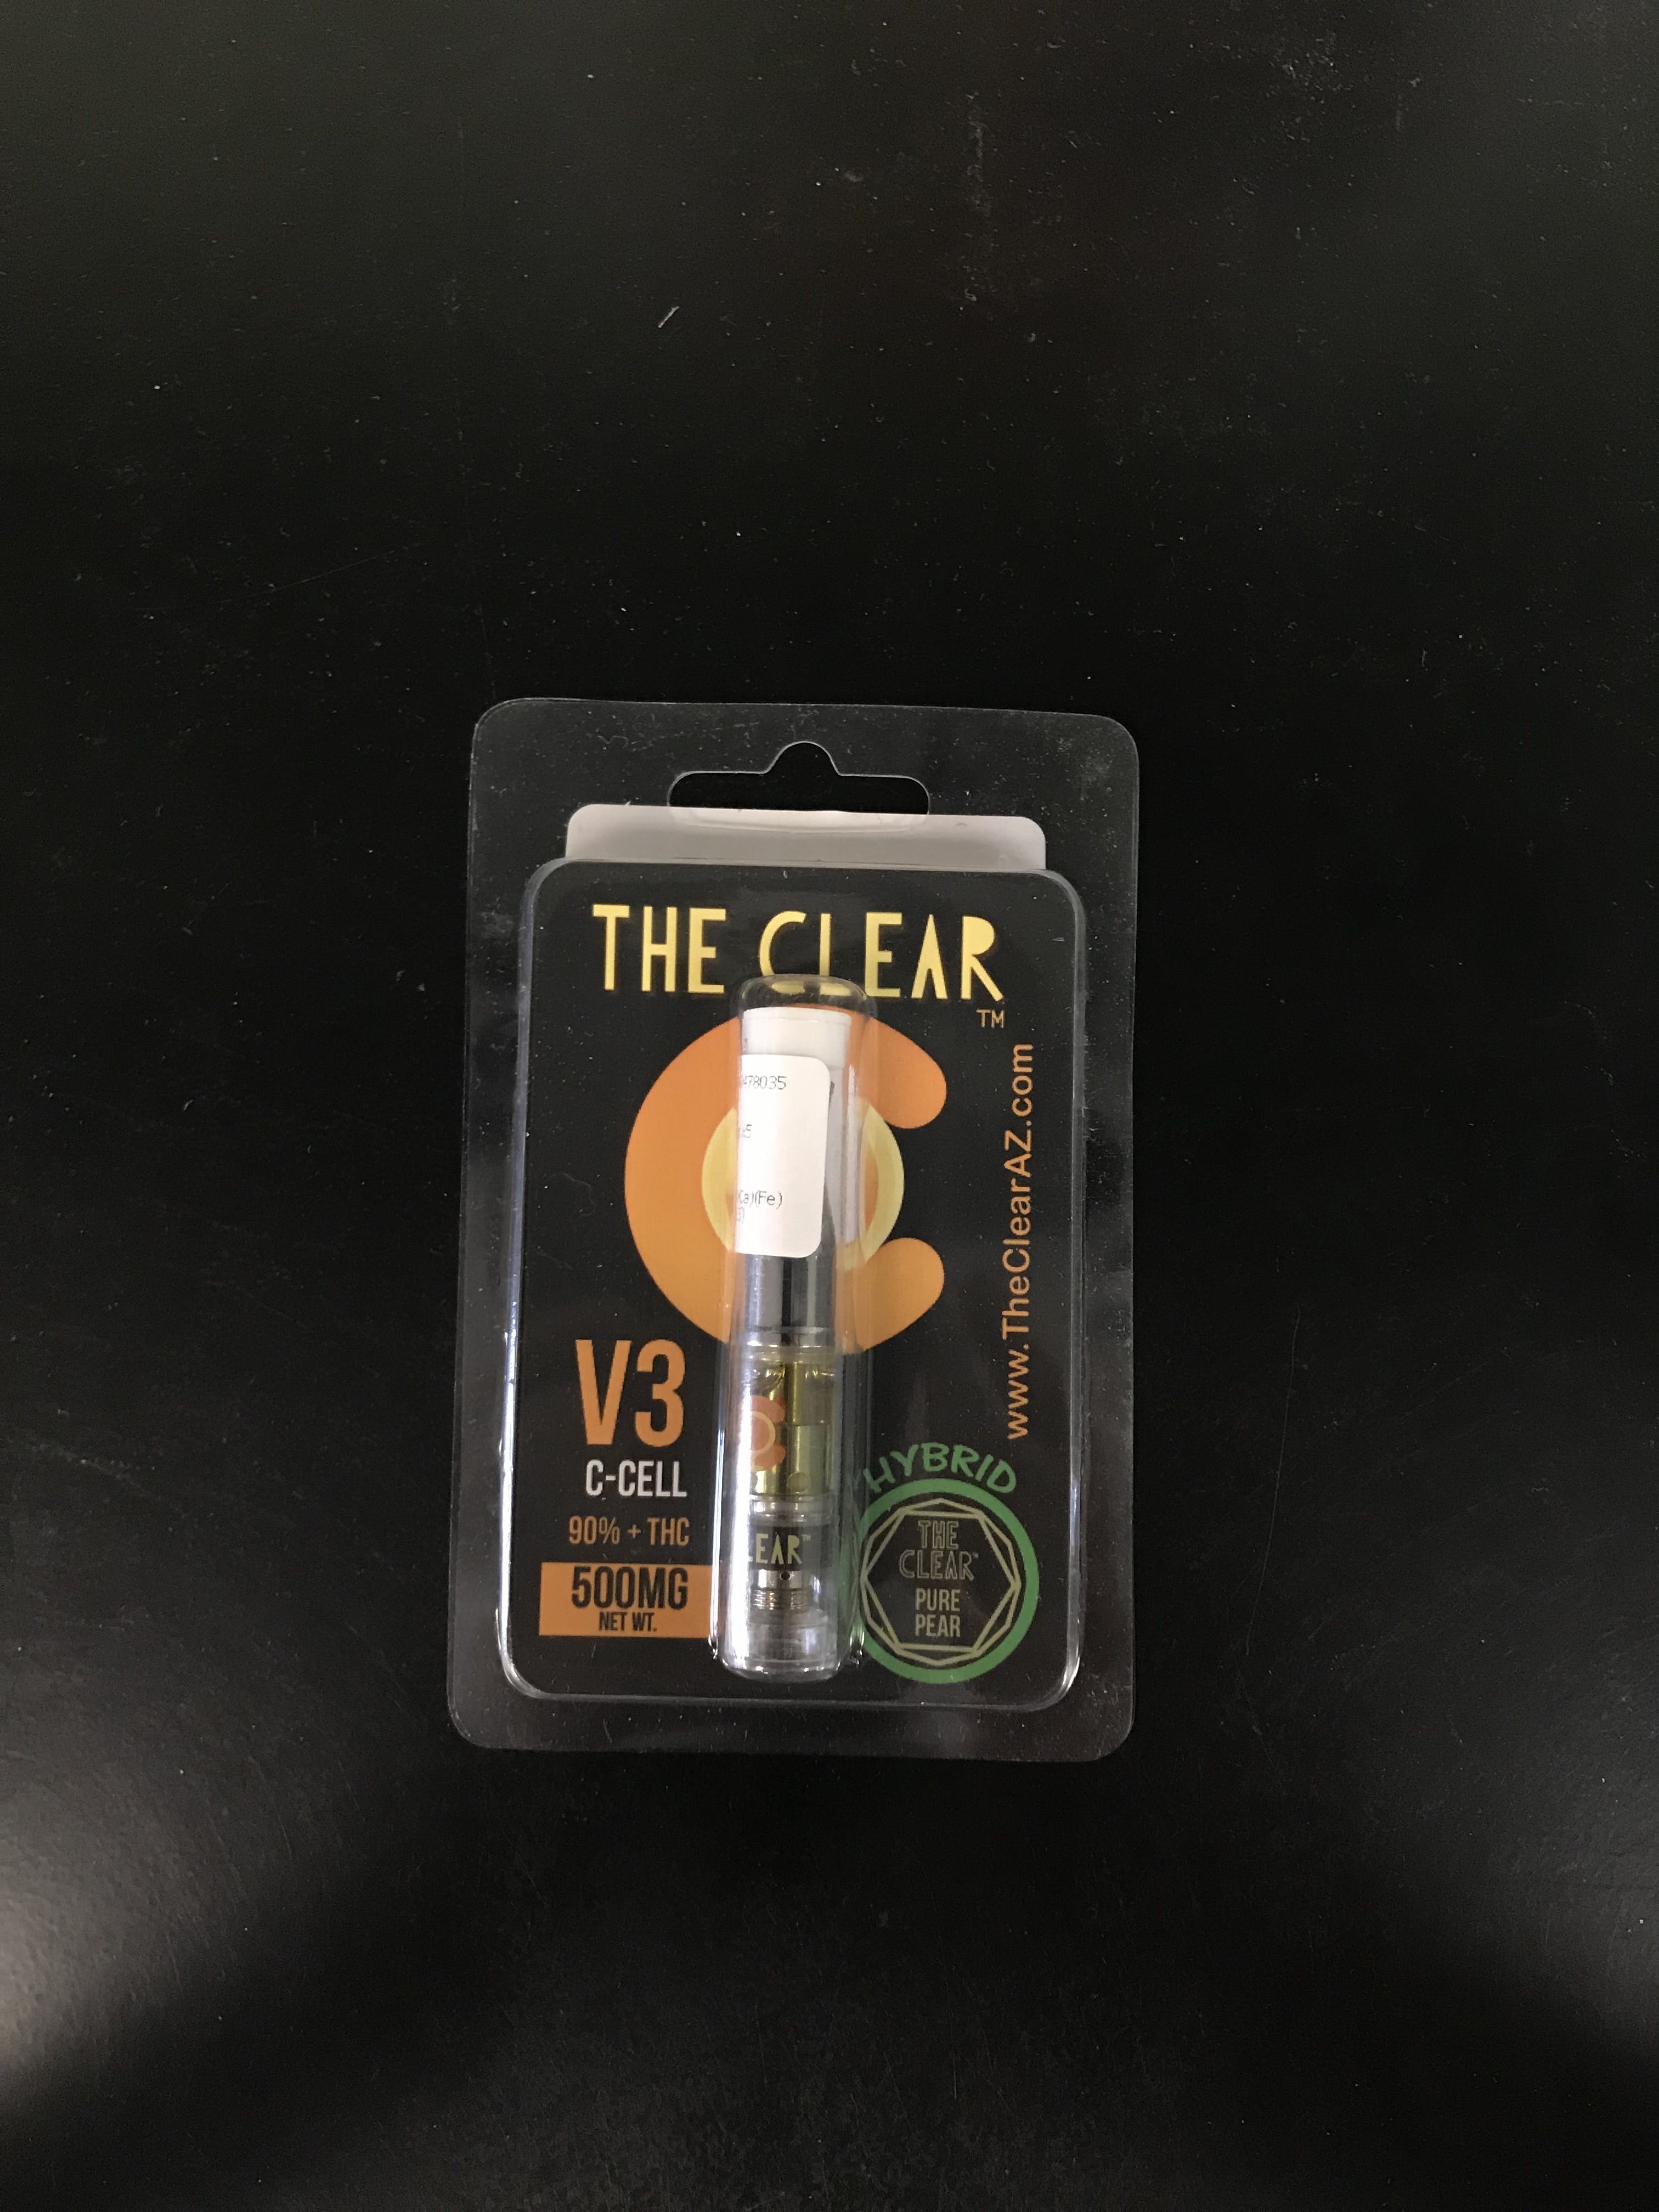 concentrate-the-clear-v3-pure-pear-500mg-cartridge